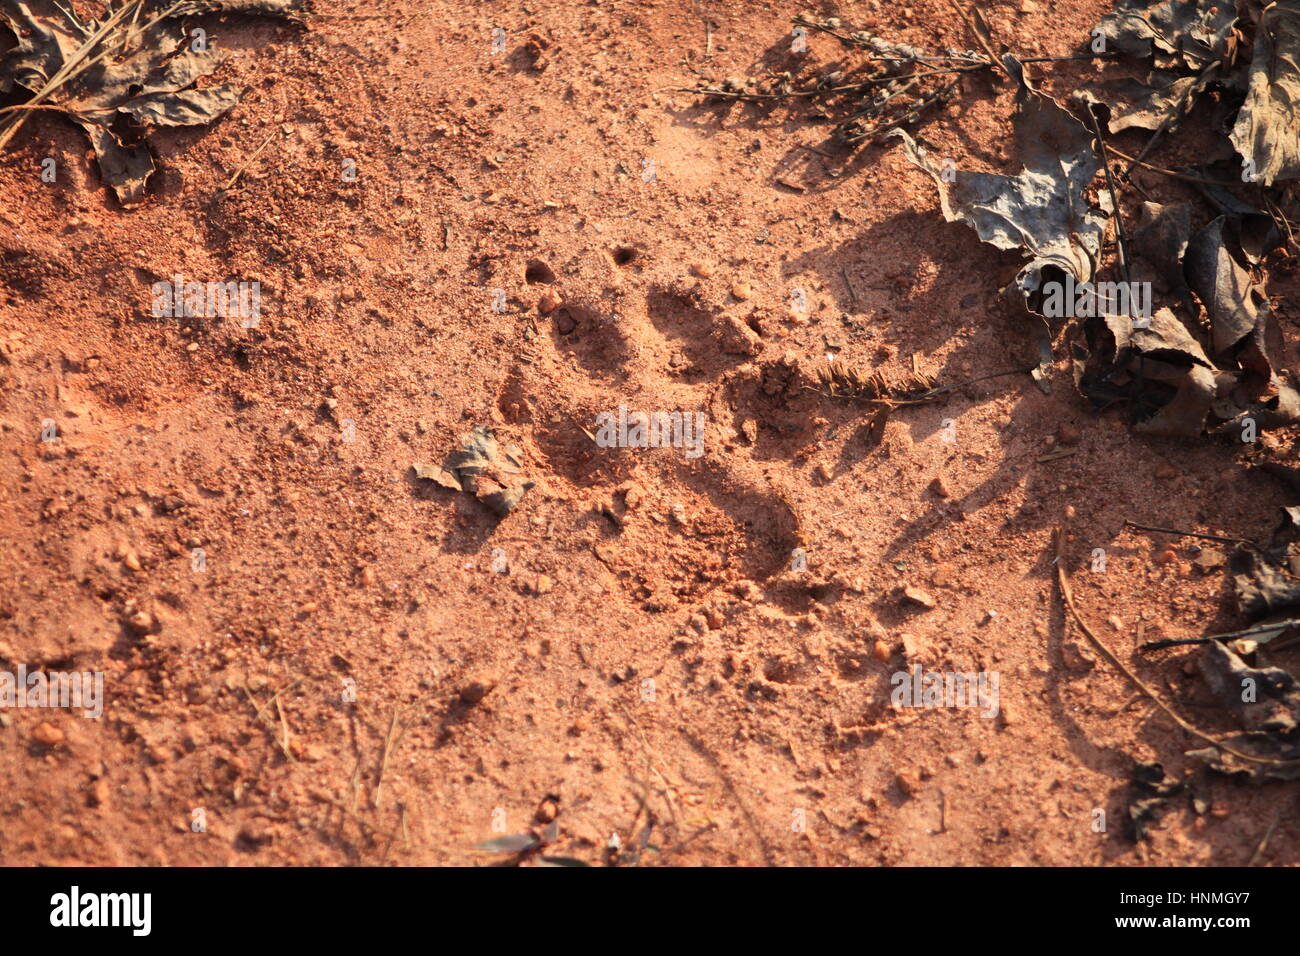 Large dog footprint in the dirt Stock Photo